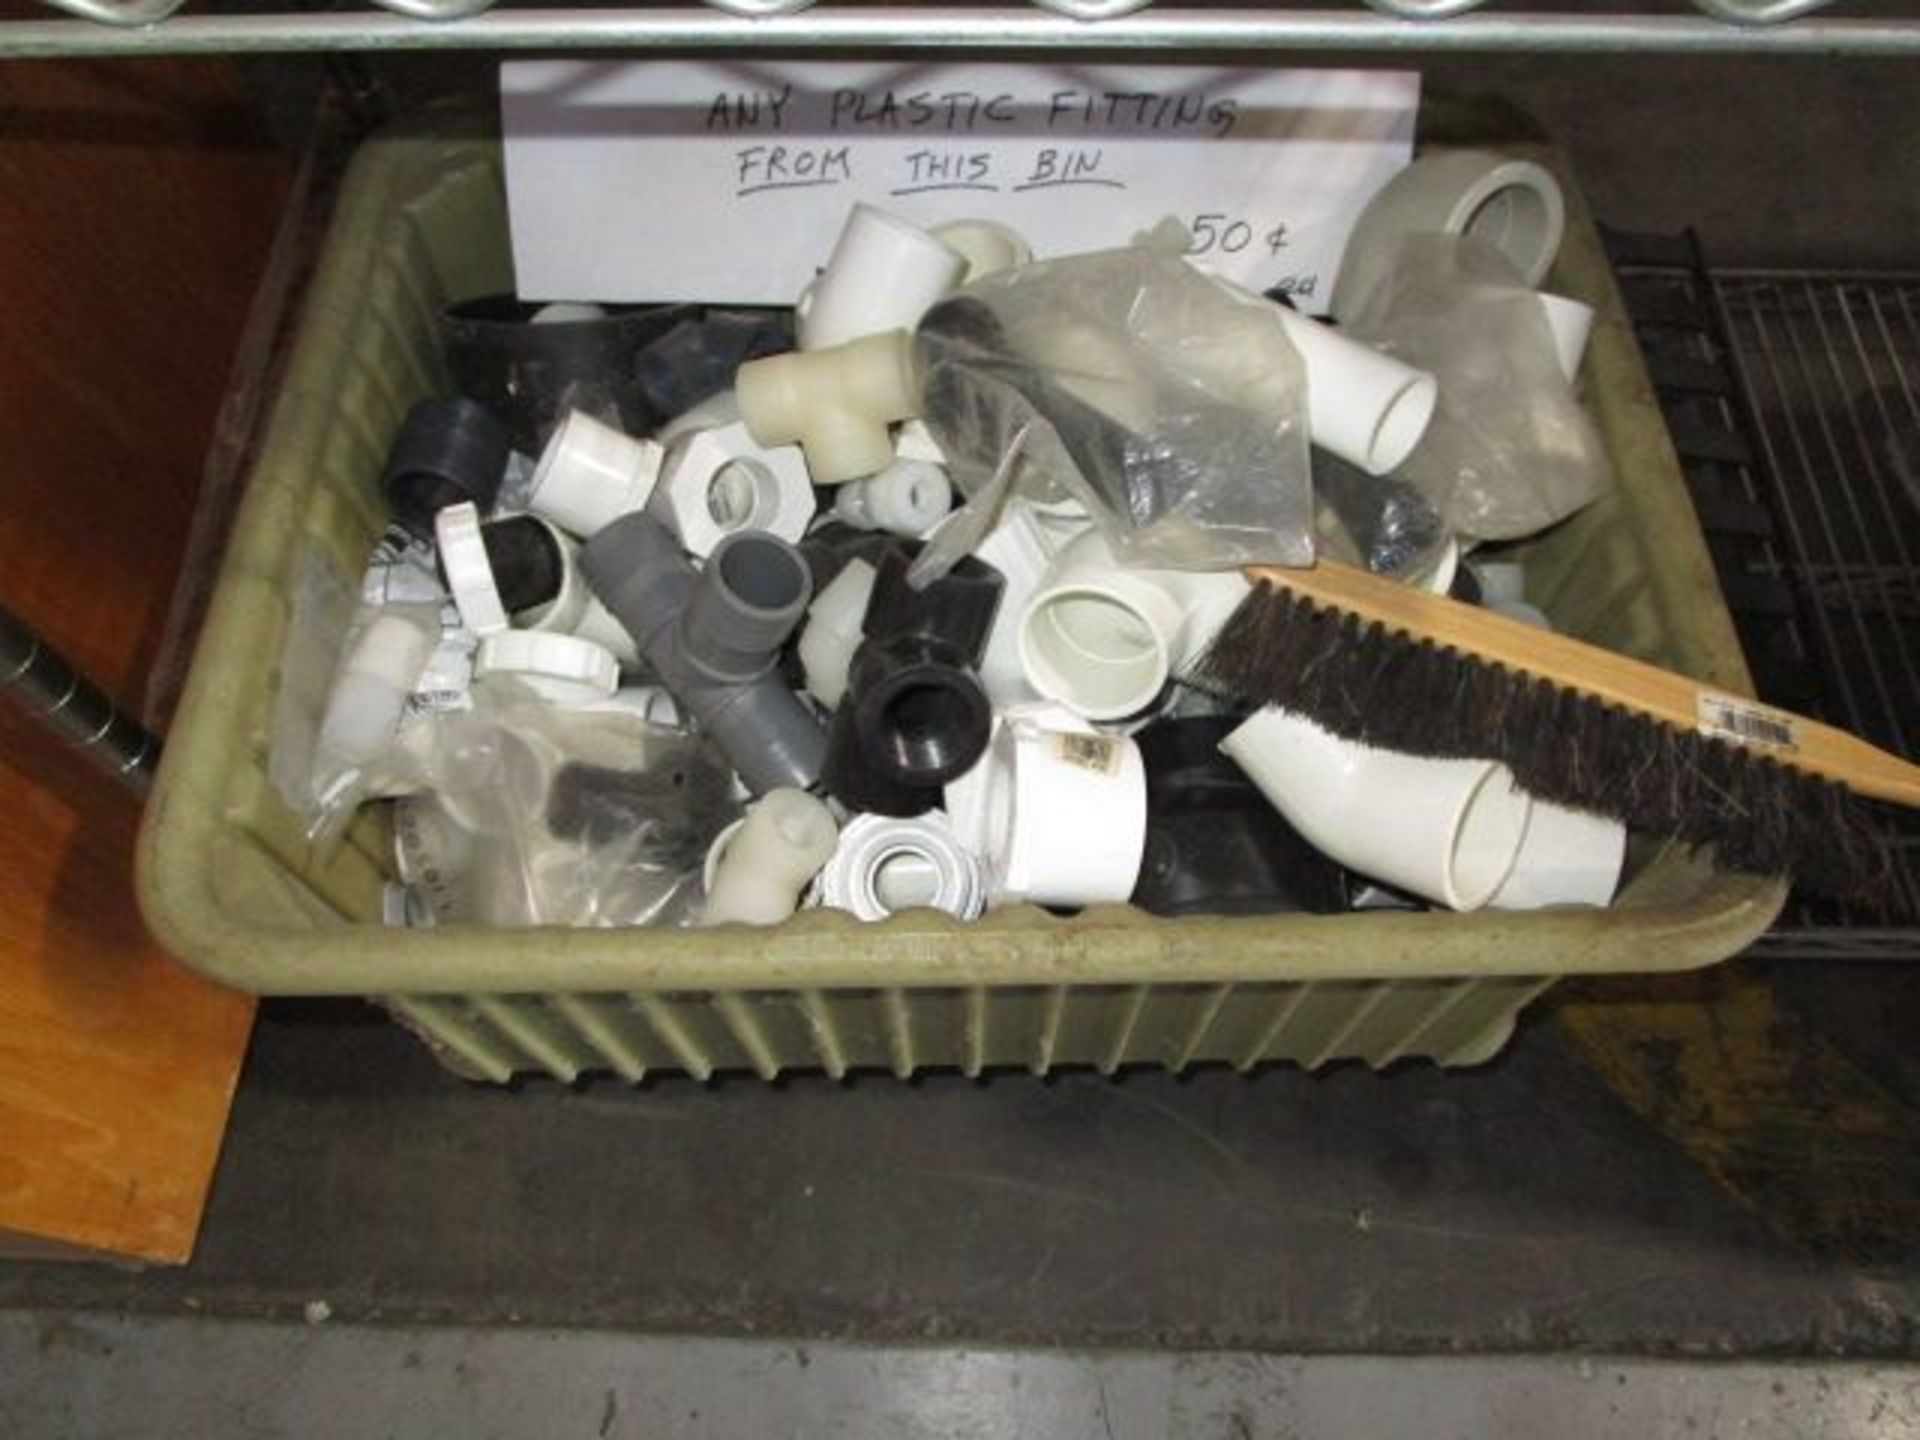 SHELVING UNIT OF CORD/ROPE, BOX OF CHASSIS, PLASTIC FITTINGS - Image 8 of 9